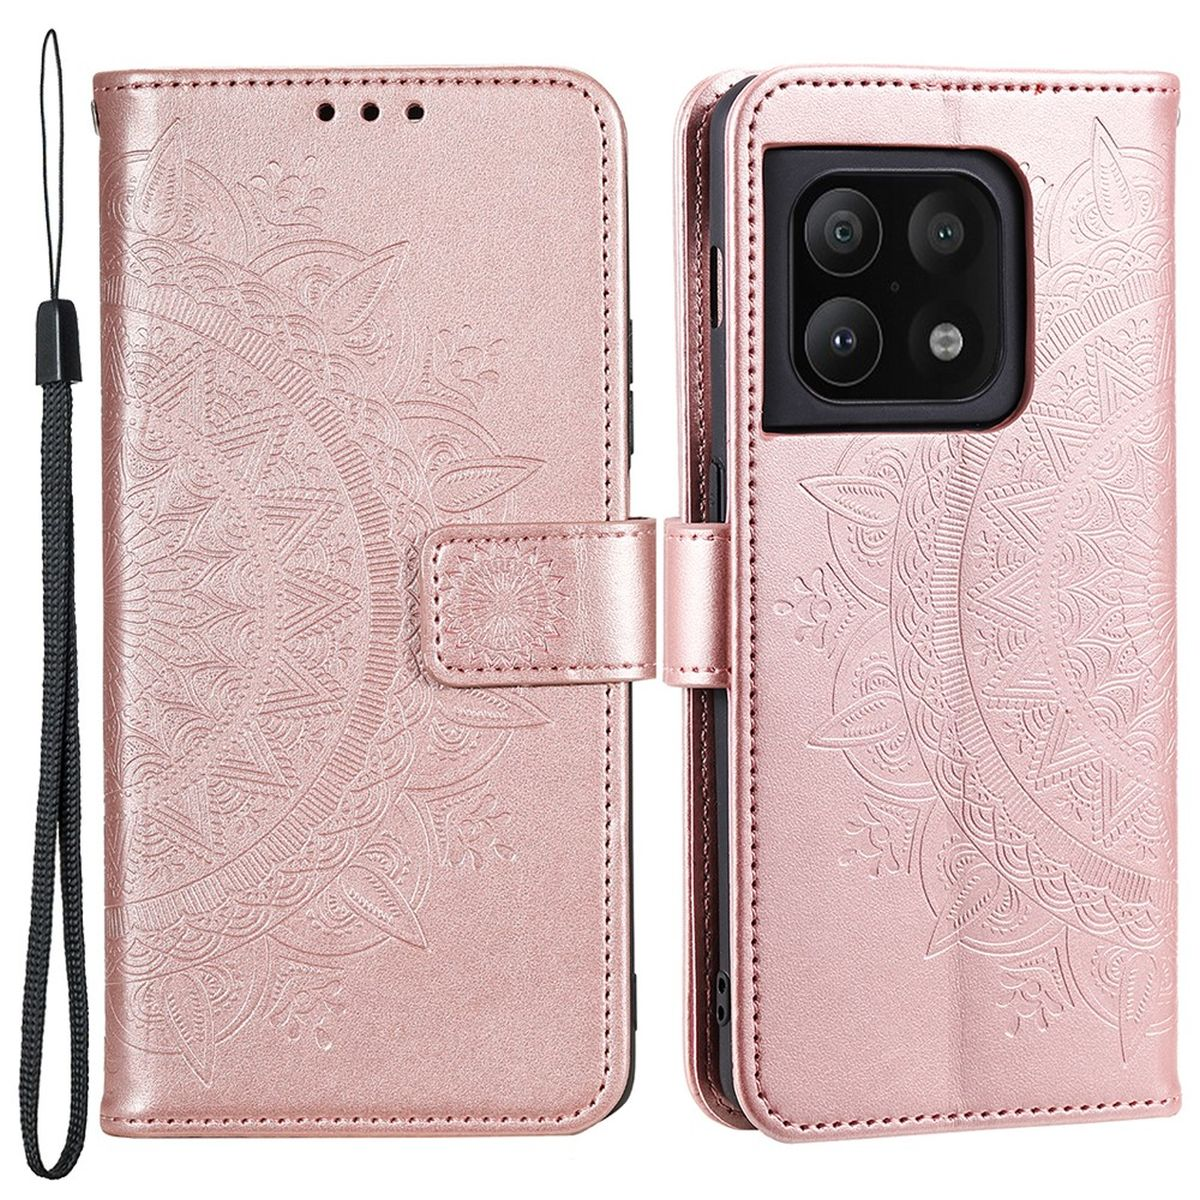 COVERKINGZ Klapphülle mit Pro Rosegold Bookcover, Mandala 10 5G, Muster, OnePlus